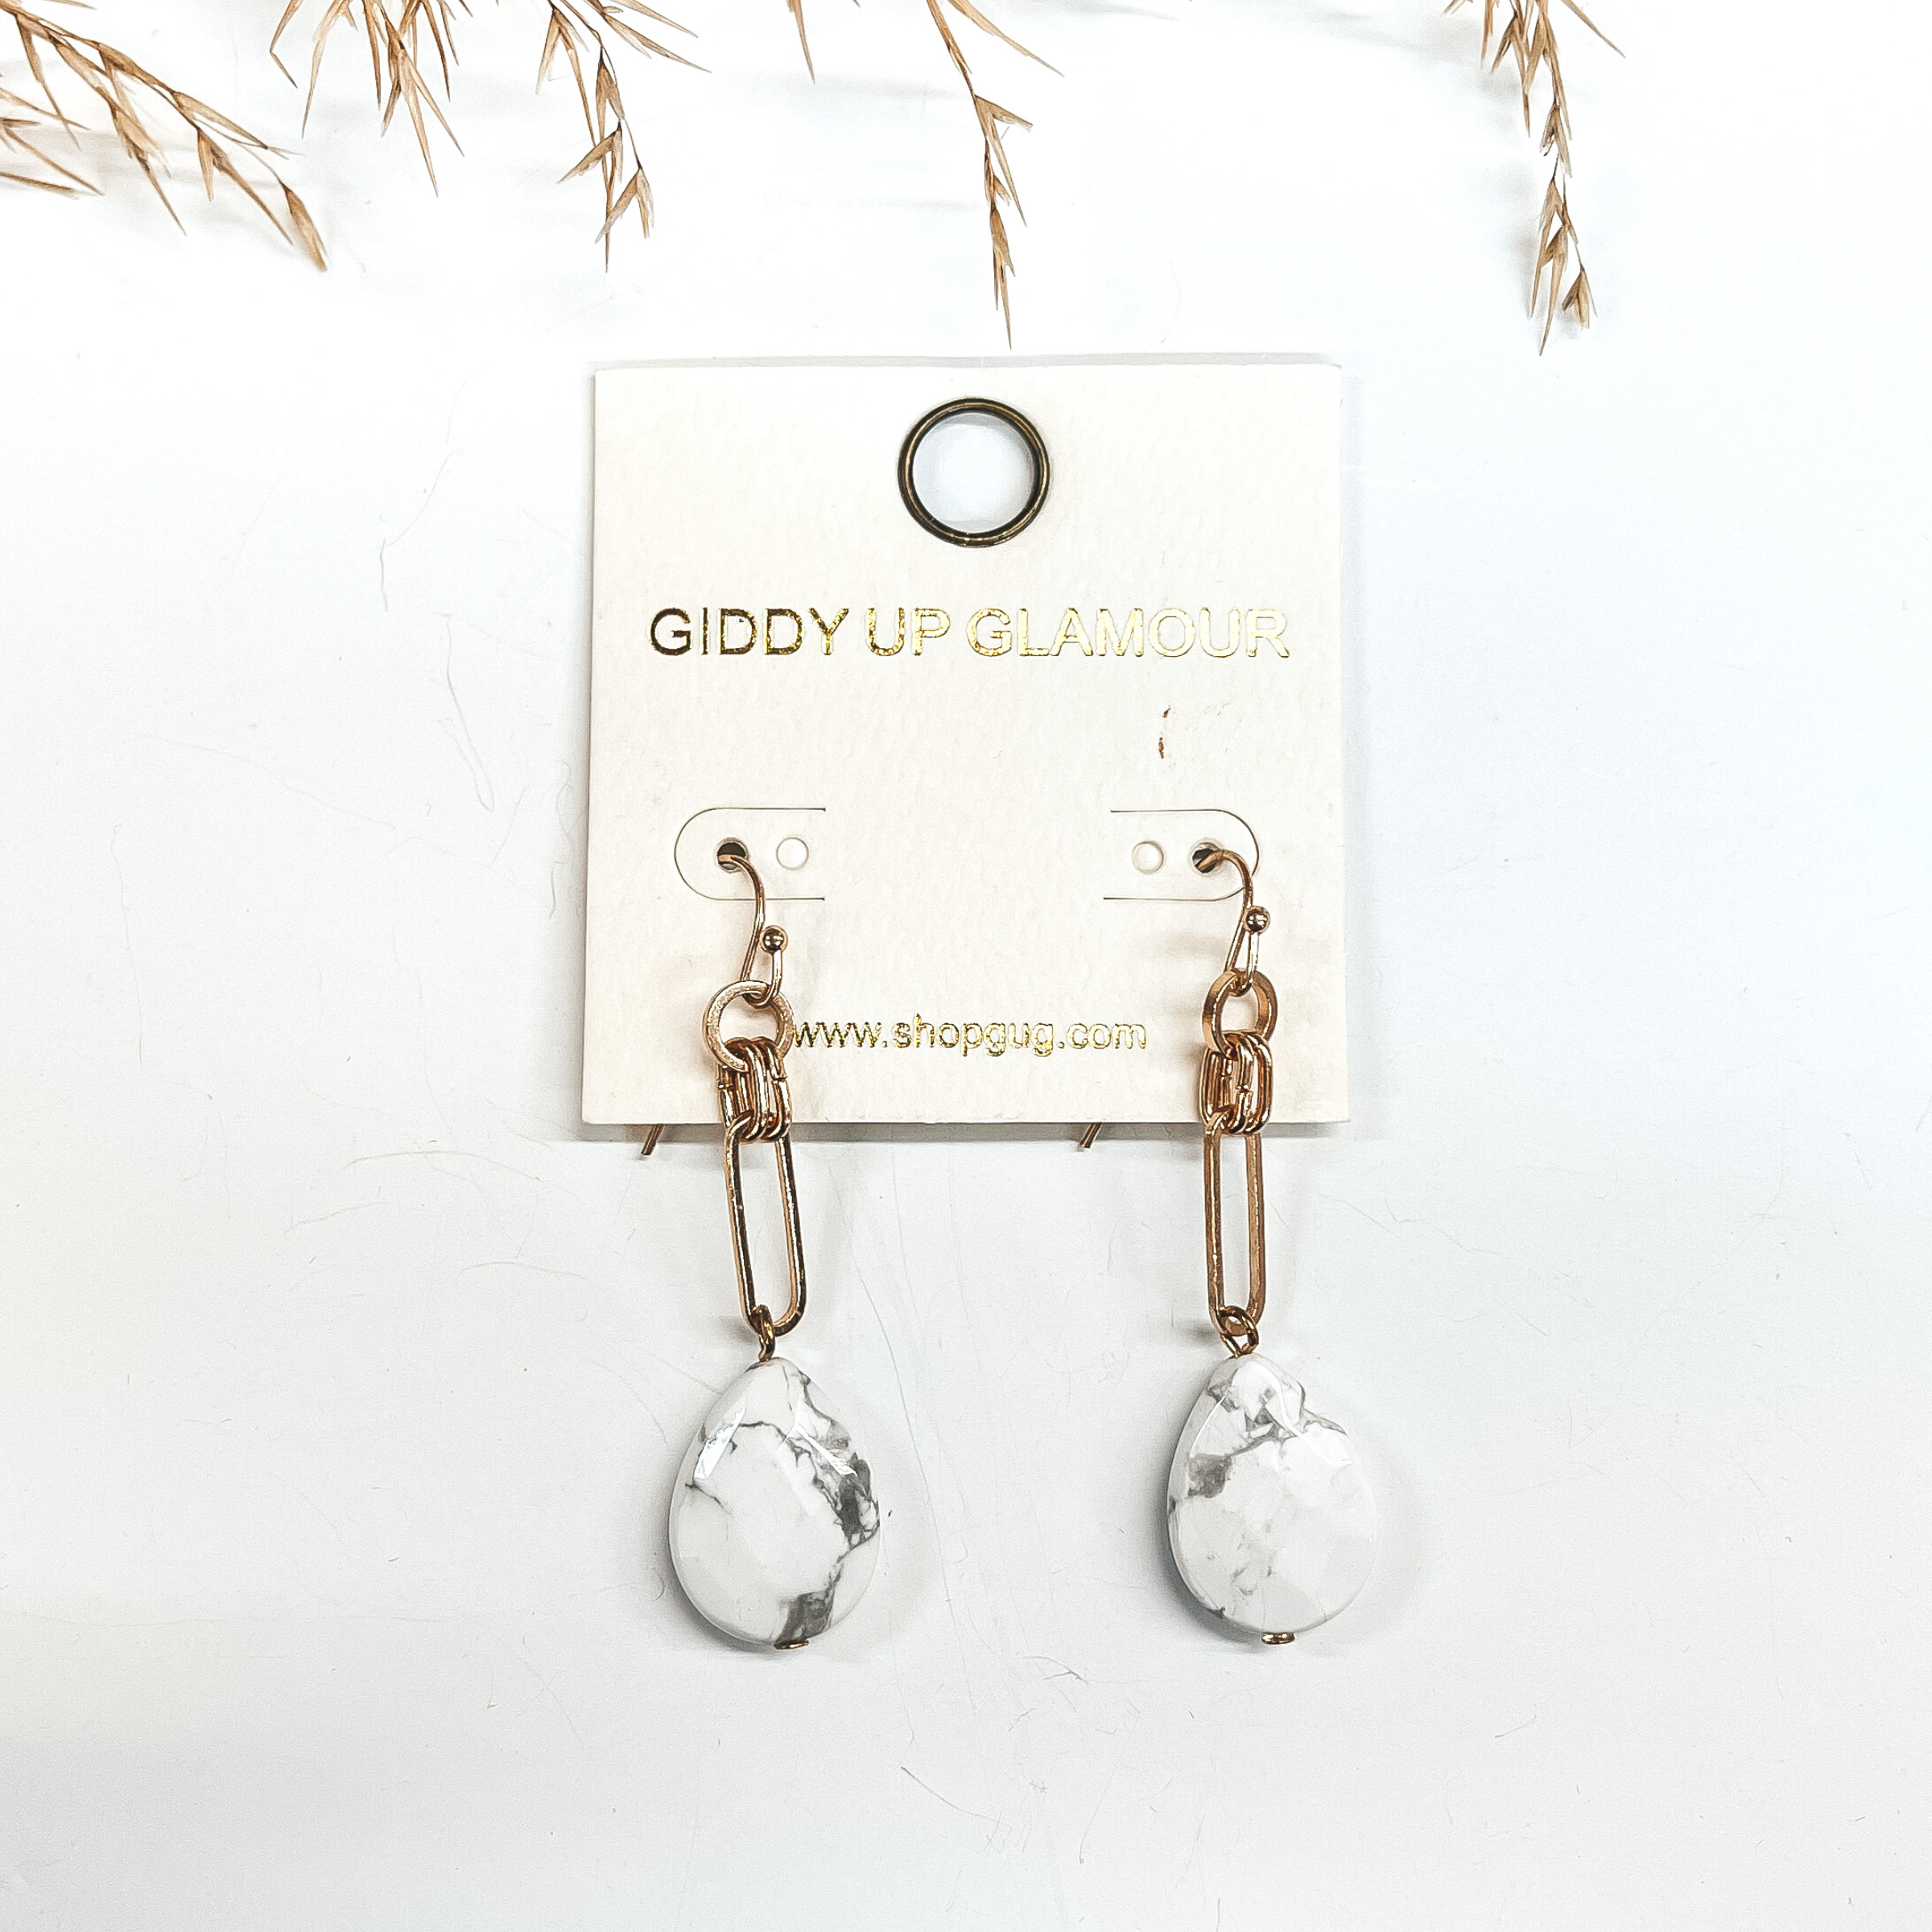 Gold chain earrings with a faux white stone drop. Taken on a white background with a brown plant in the  back as decor.